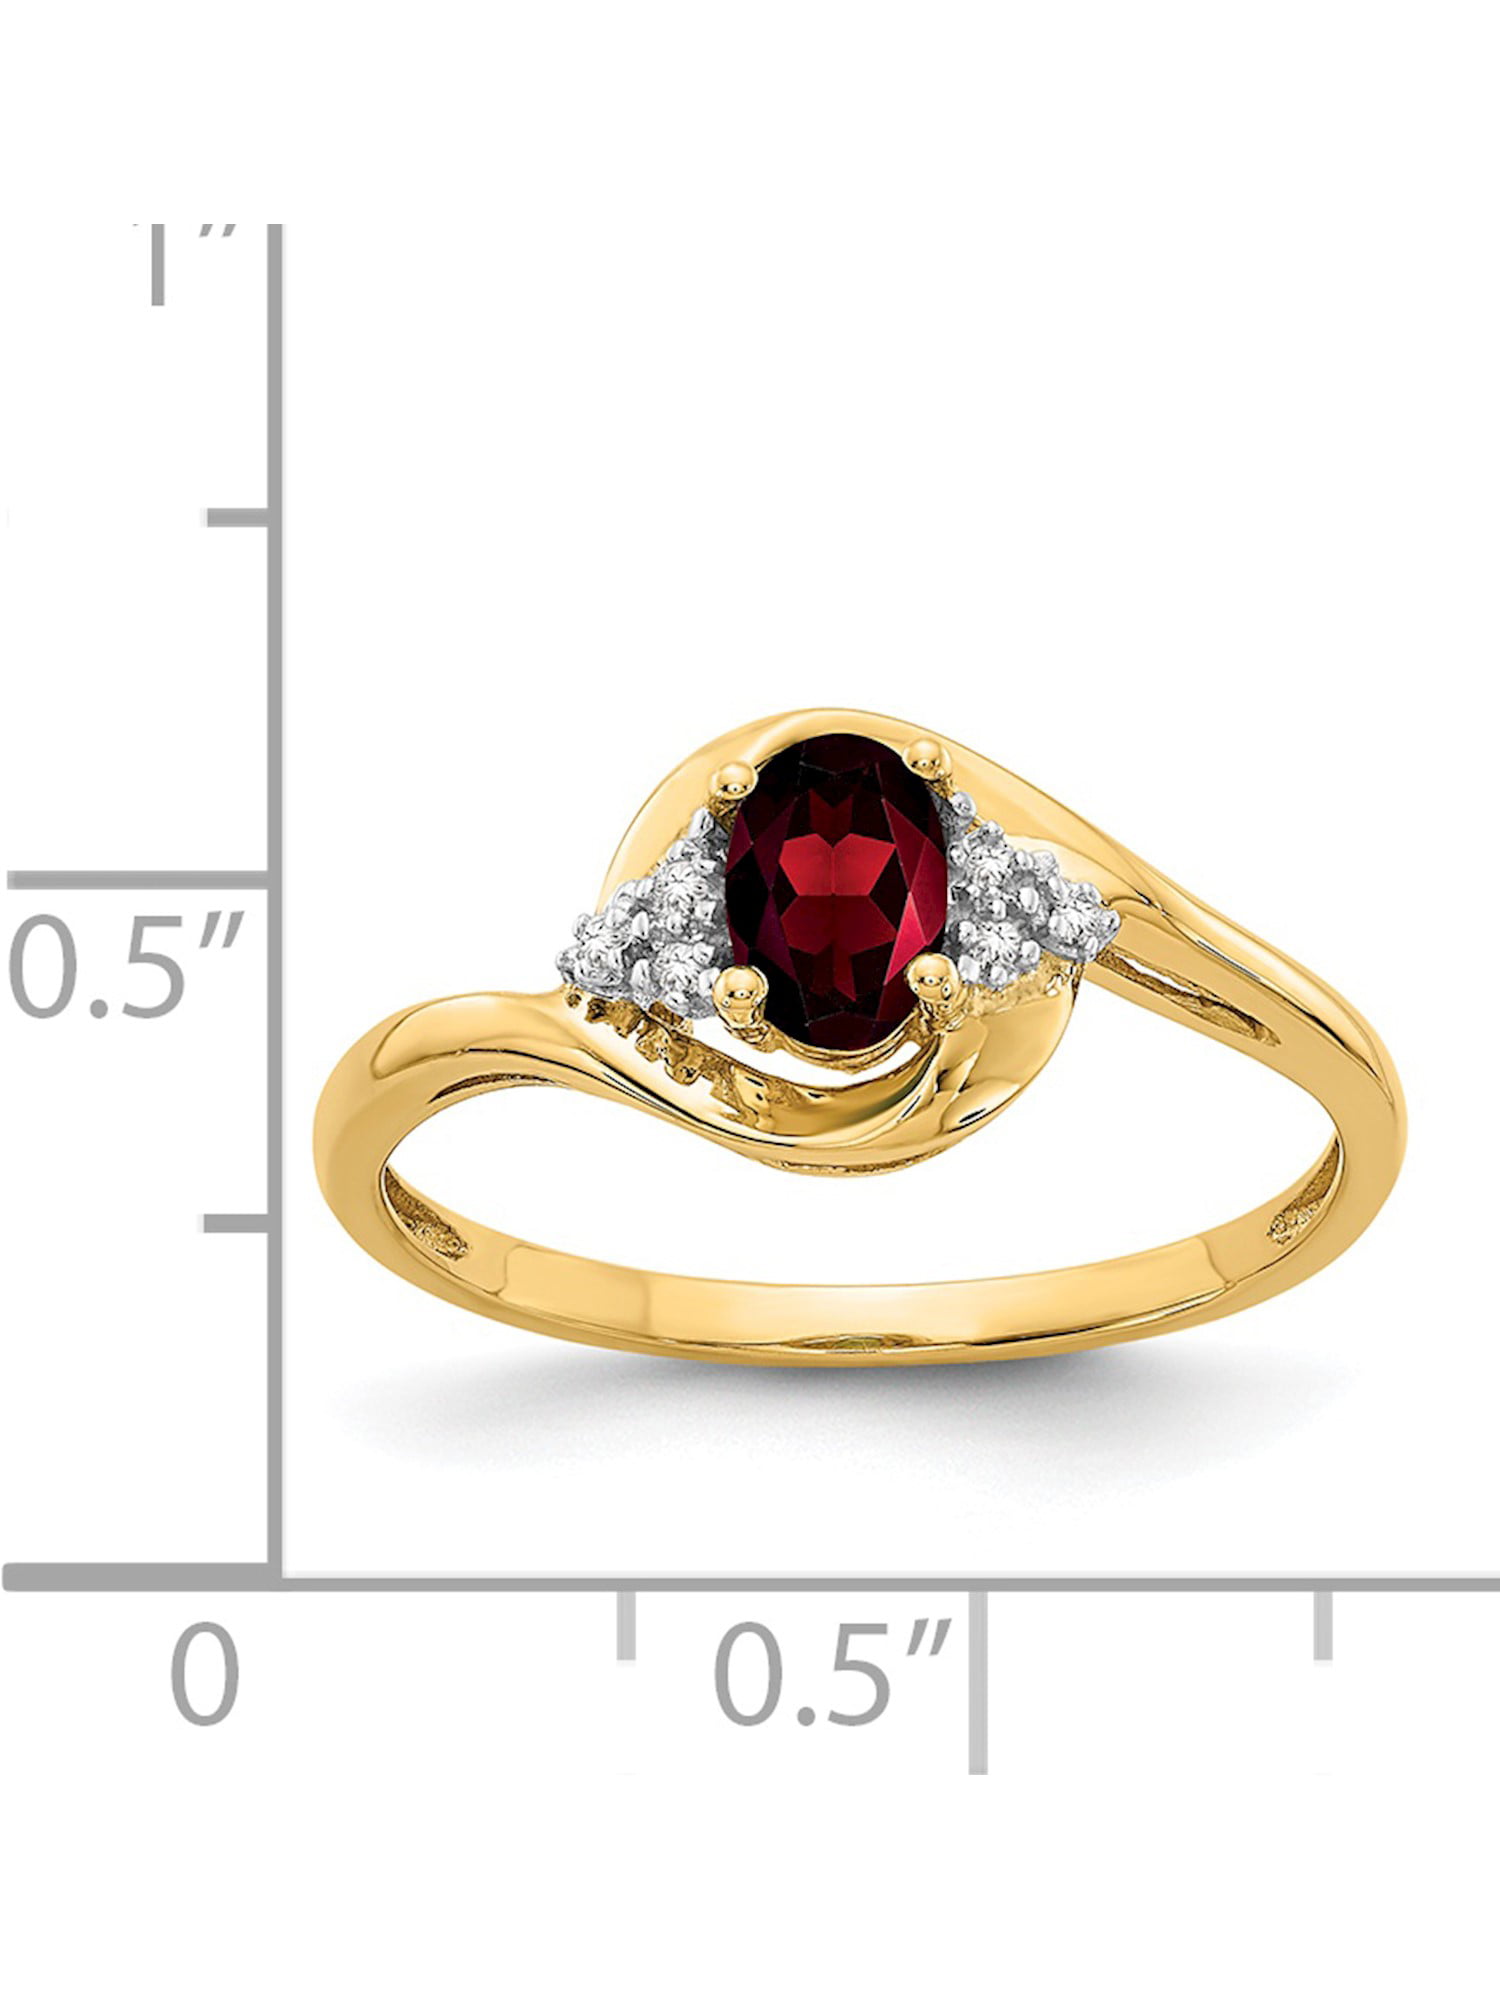 Details about  / 10k Yellow Gold Pear Garnet And Diamond Ring